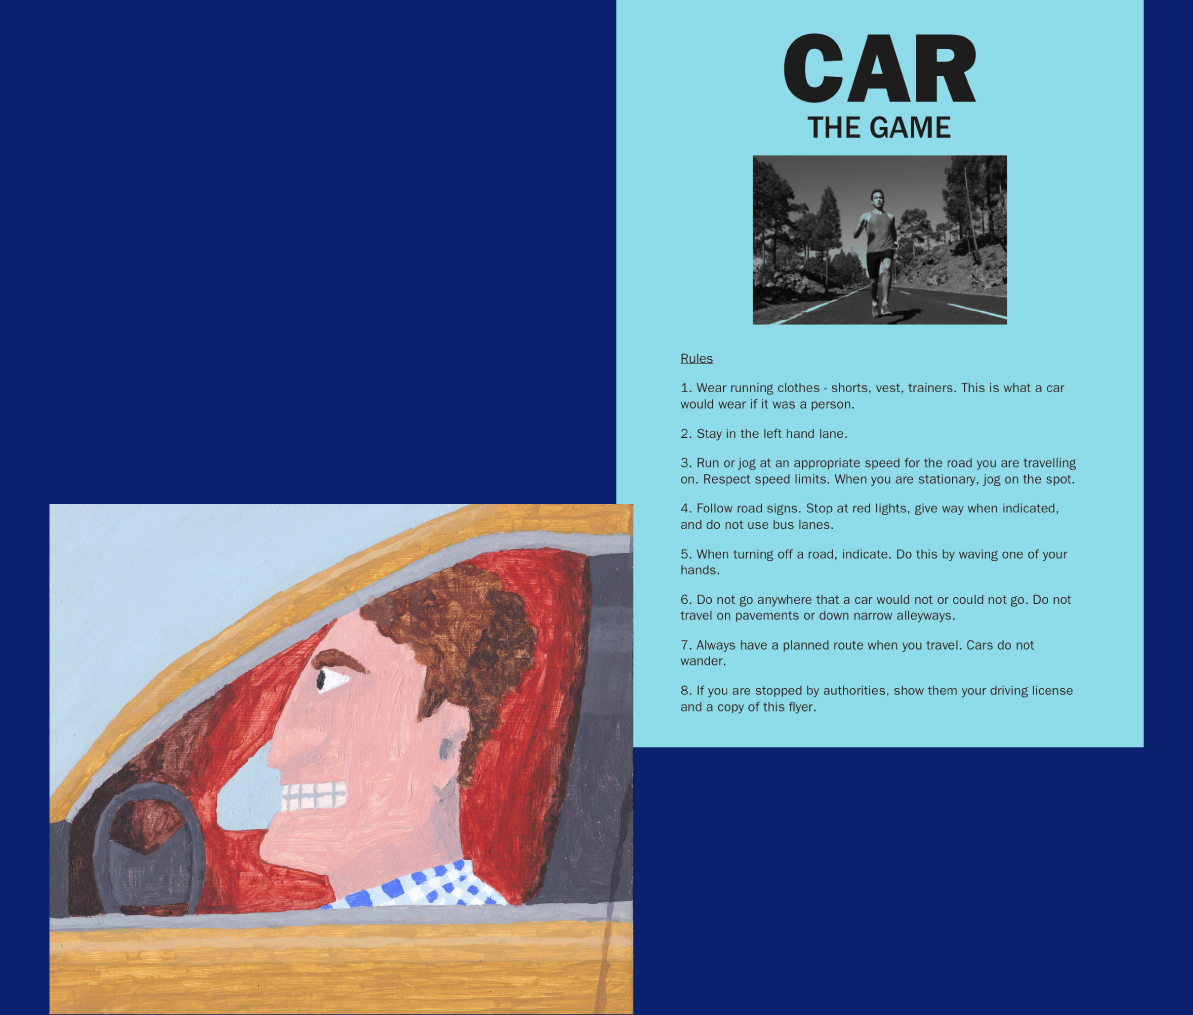 Car, the game, a hypothetical and dangerous art game, and a painting of a man in a car